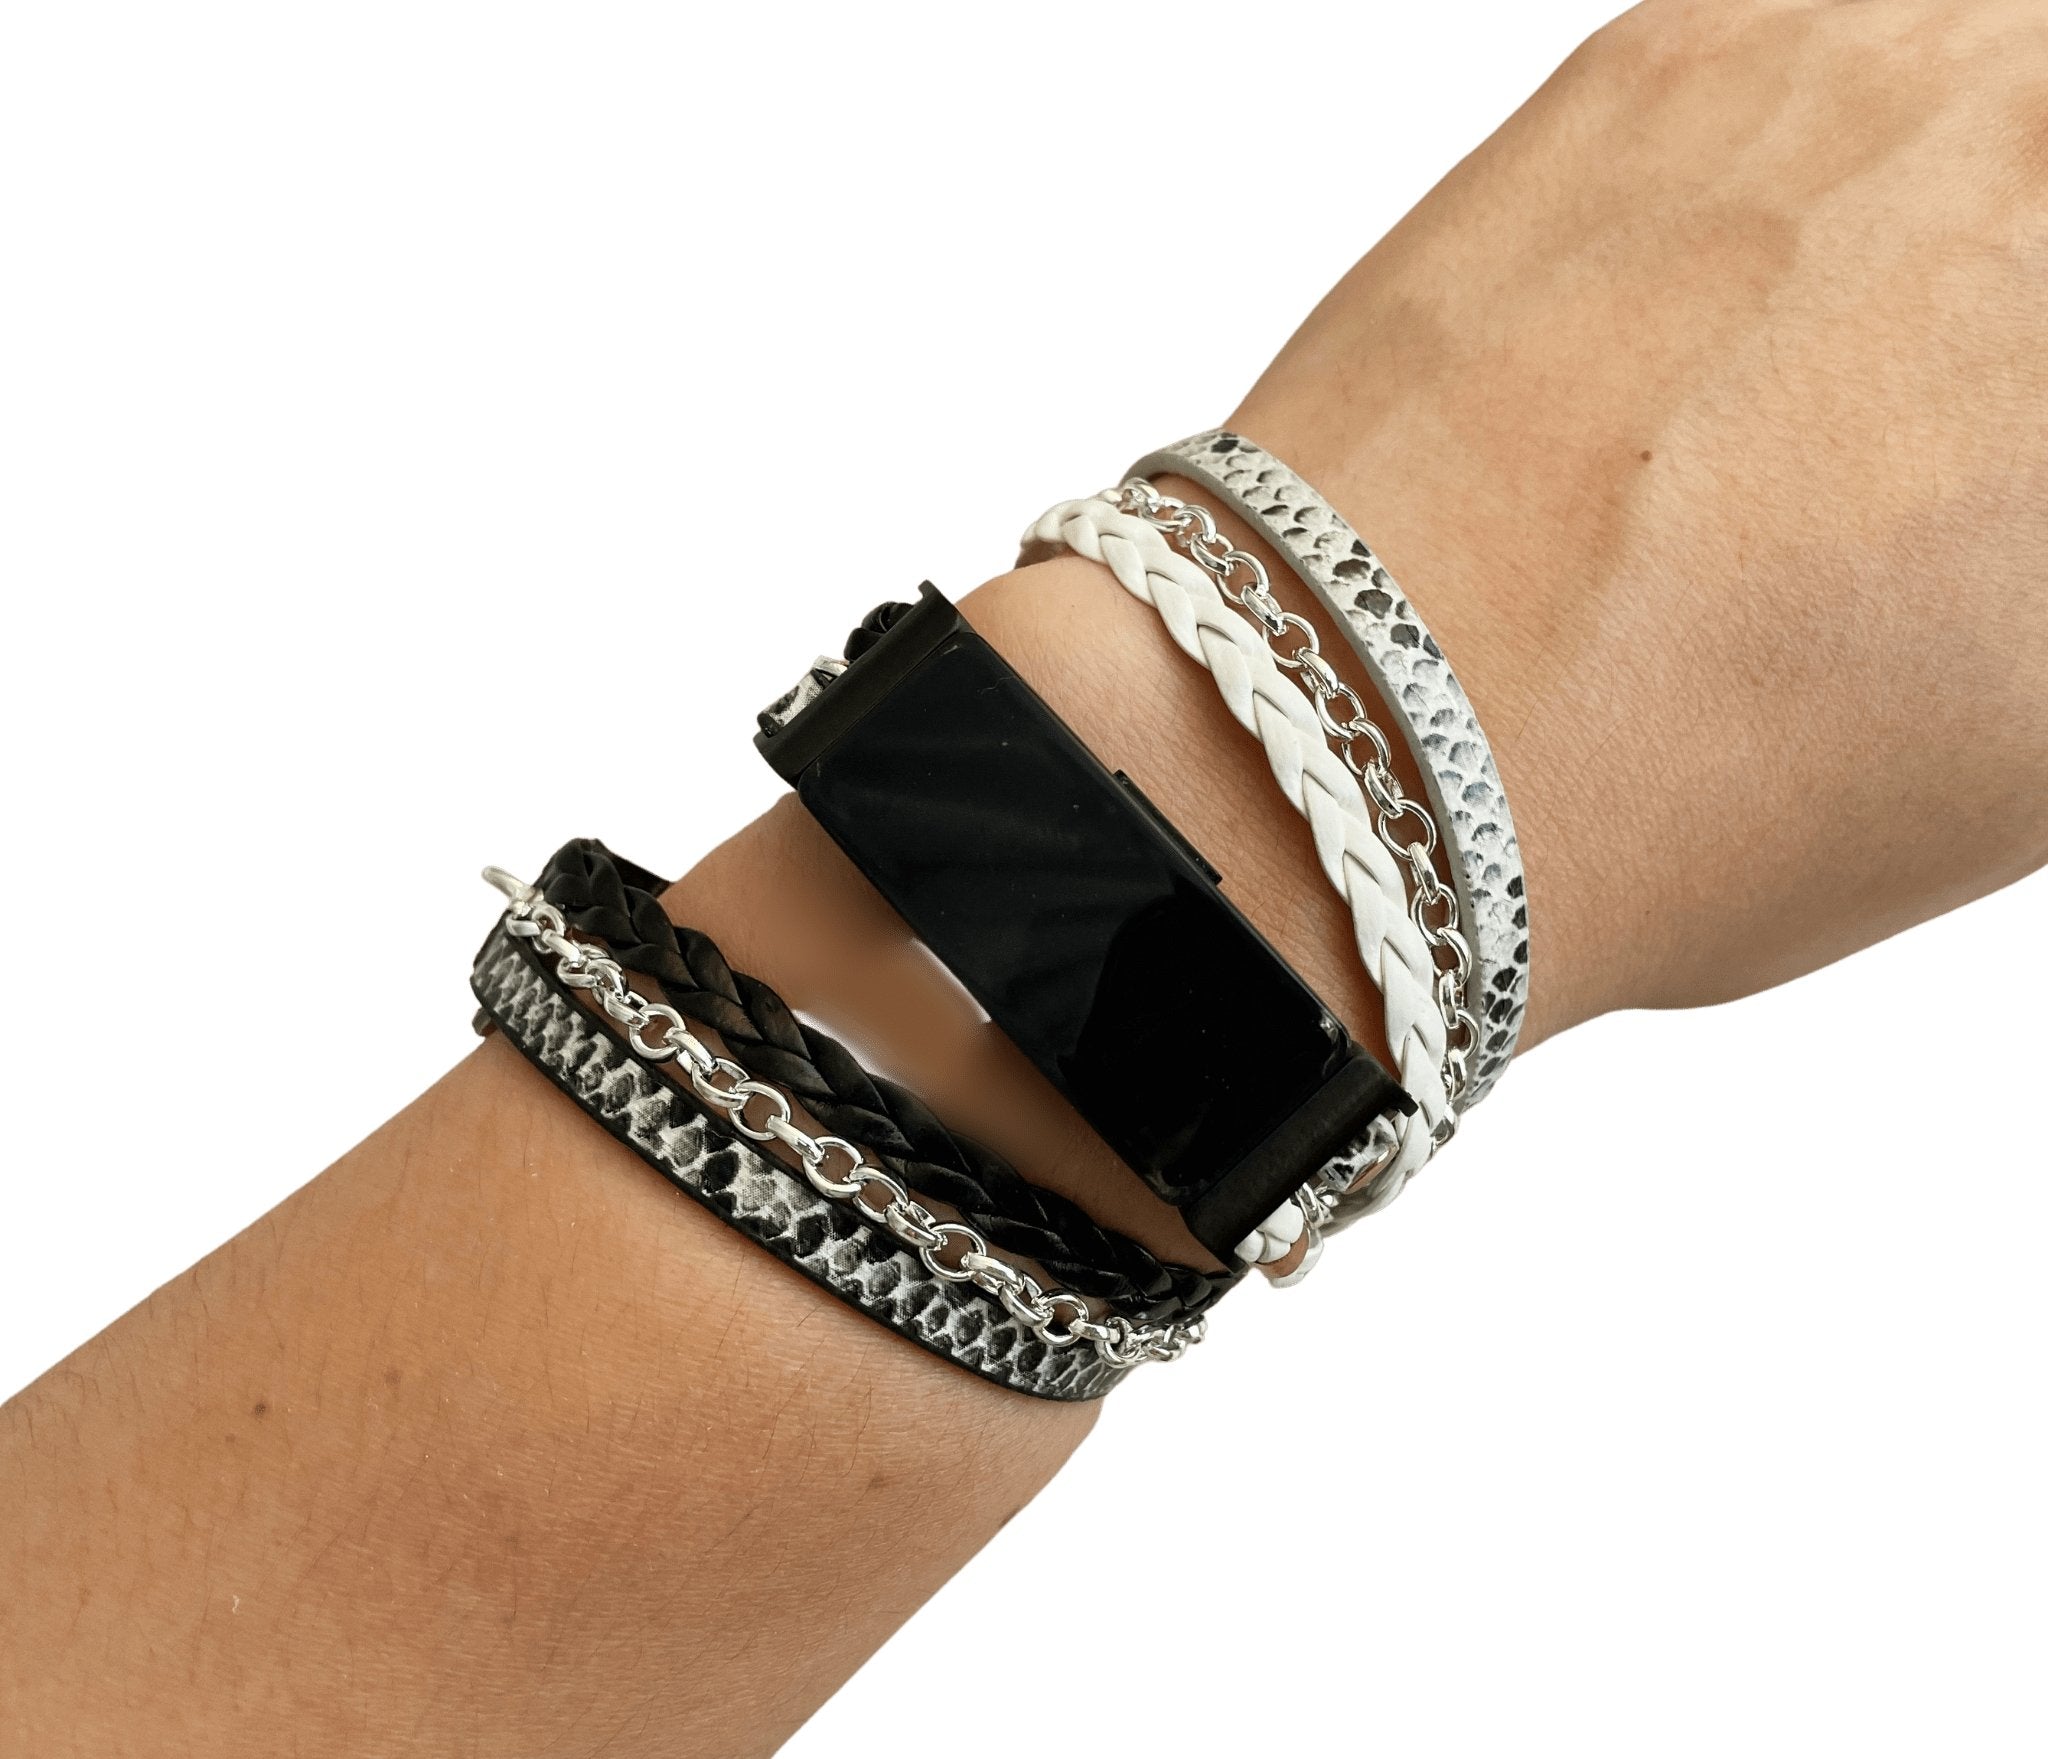 Boho Chic White Snakeskin LeatherWatch Band with Silver Chain for